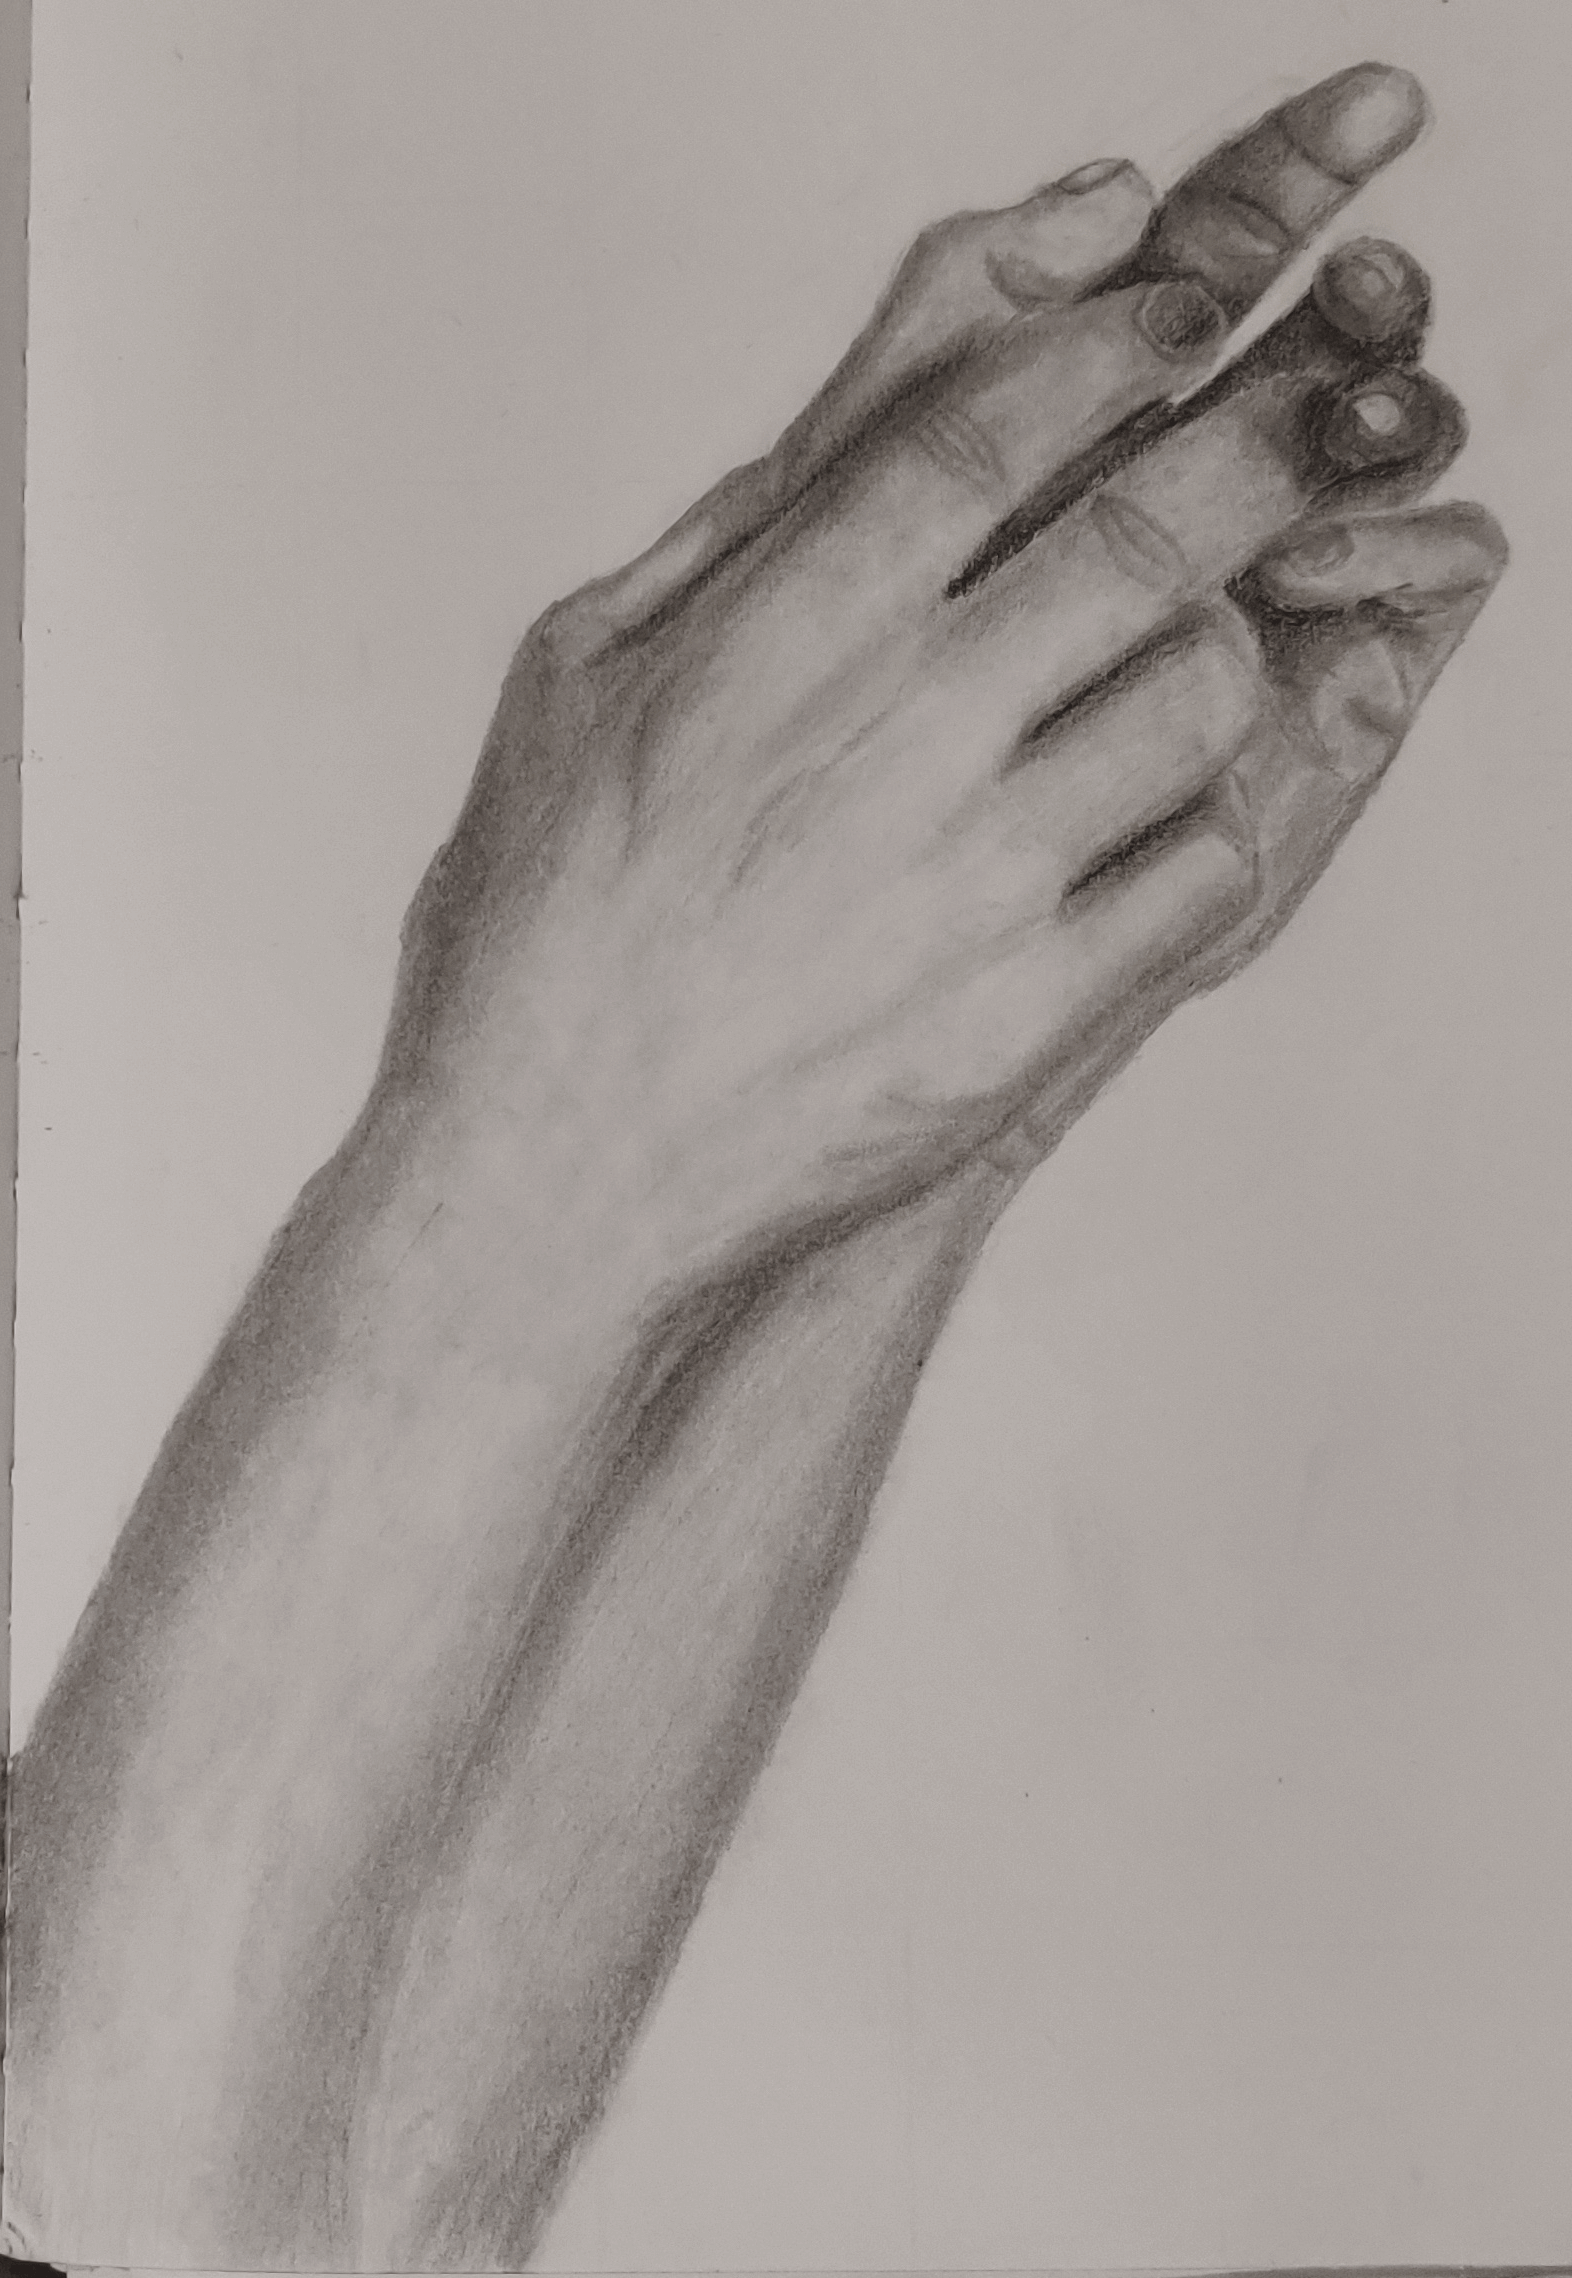 A value drawing of my hands together.